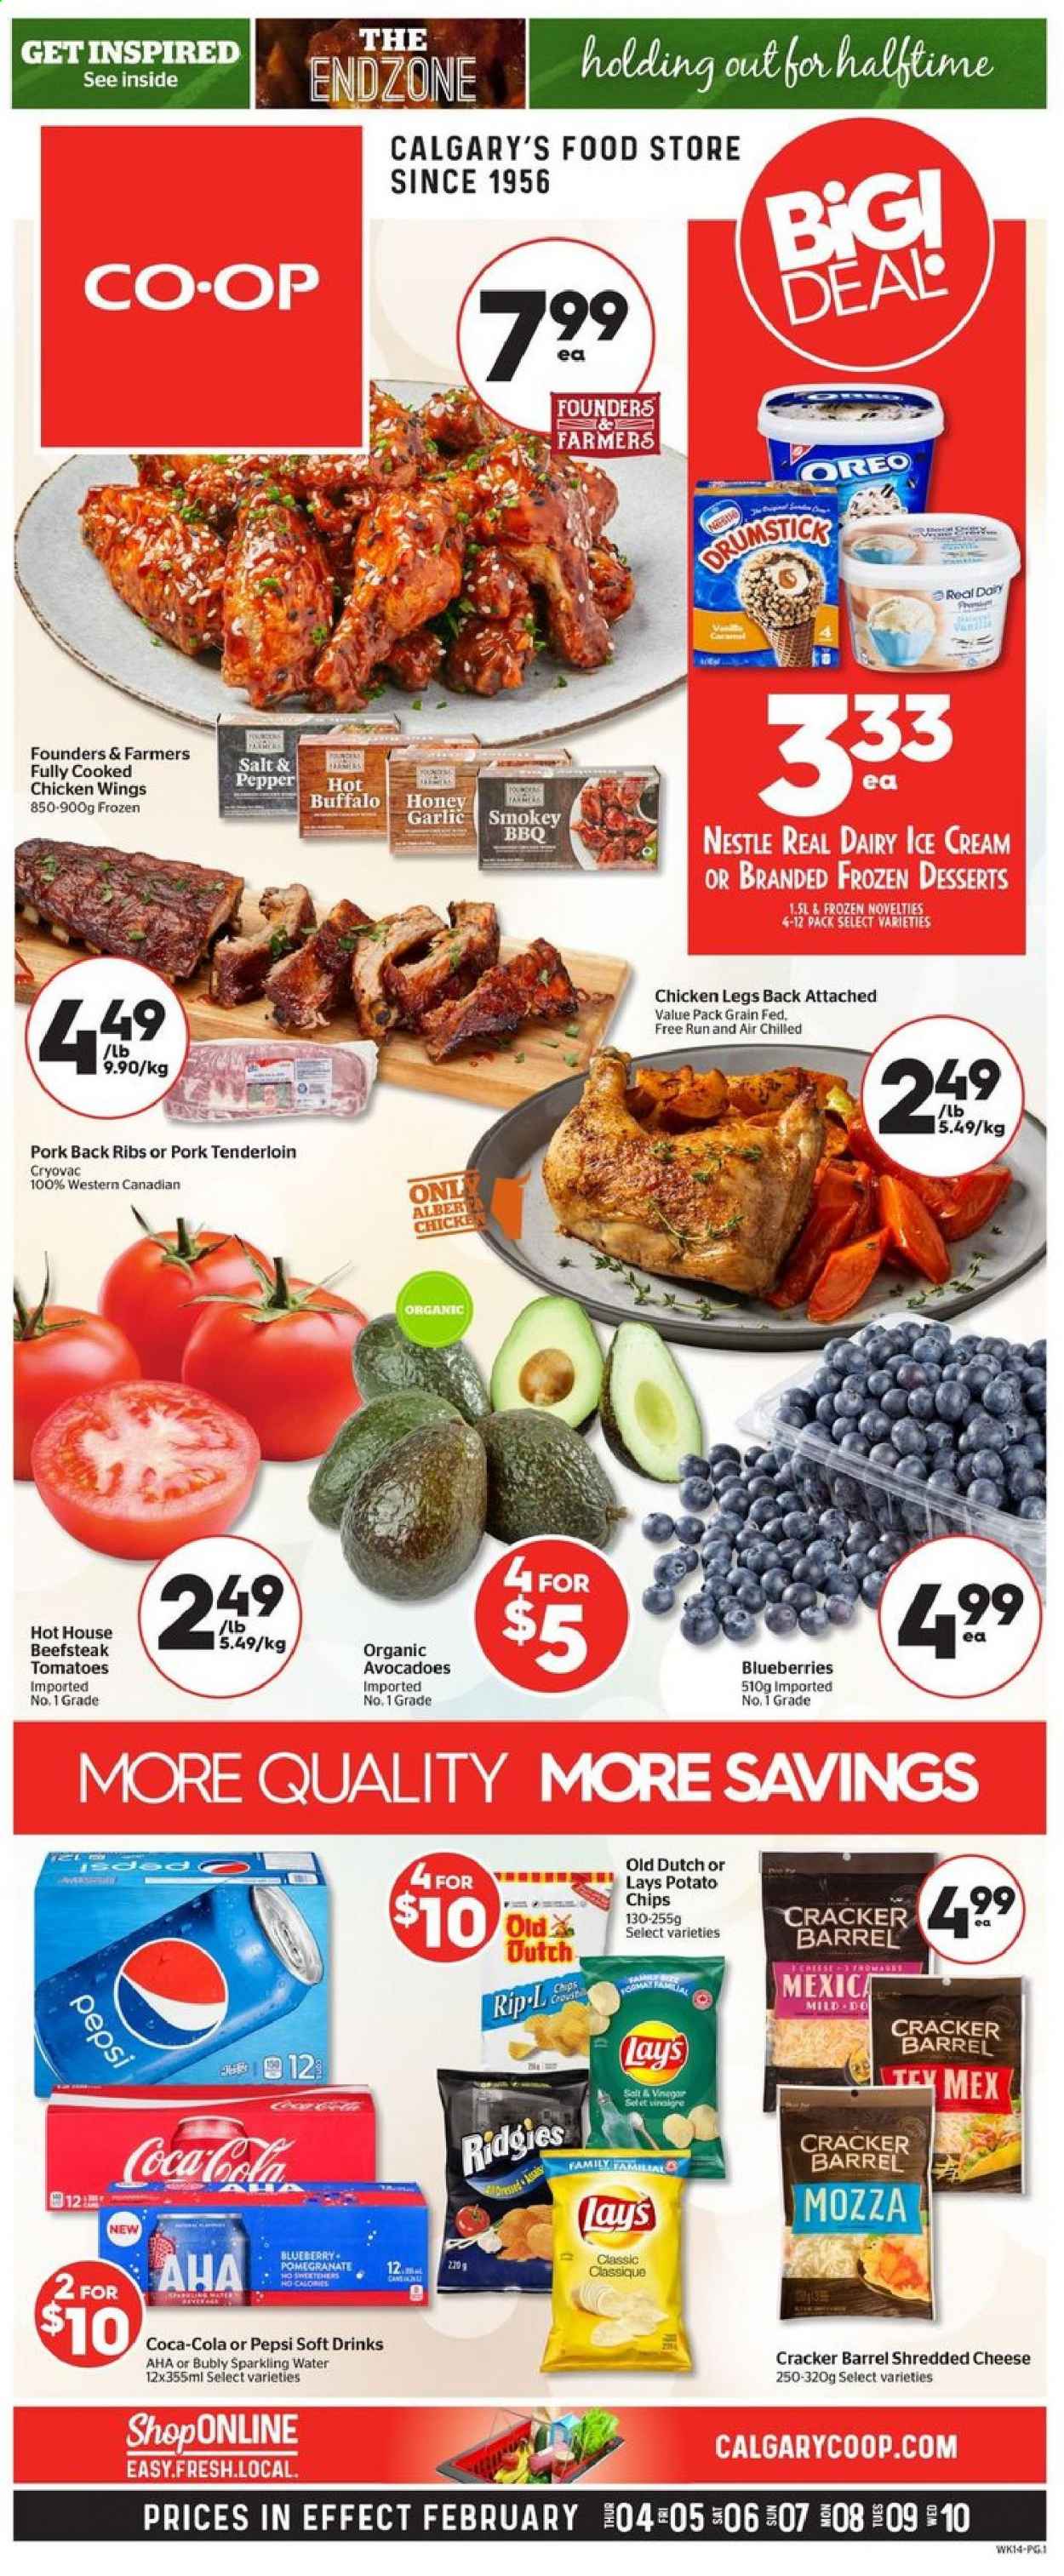 thumbnail - Calgary Co-op Flyer - February 04, 2021 - February 10, 2021 - Sales products - garlic, tomatoes, blueberries, pomegranate, shredded cheese, Oreo, chicken wings, crackers, potato chips, Lay’s, honey, Coca-Cola, Pepsi, soft drink, sparkling water, chicken legs, chicken, pork meat, pork ribs, pork tenderloin, pork back ribs, Nestlé. Page 1.